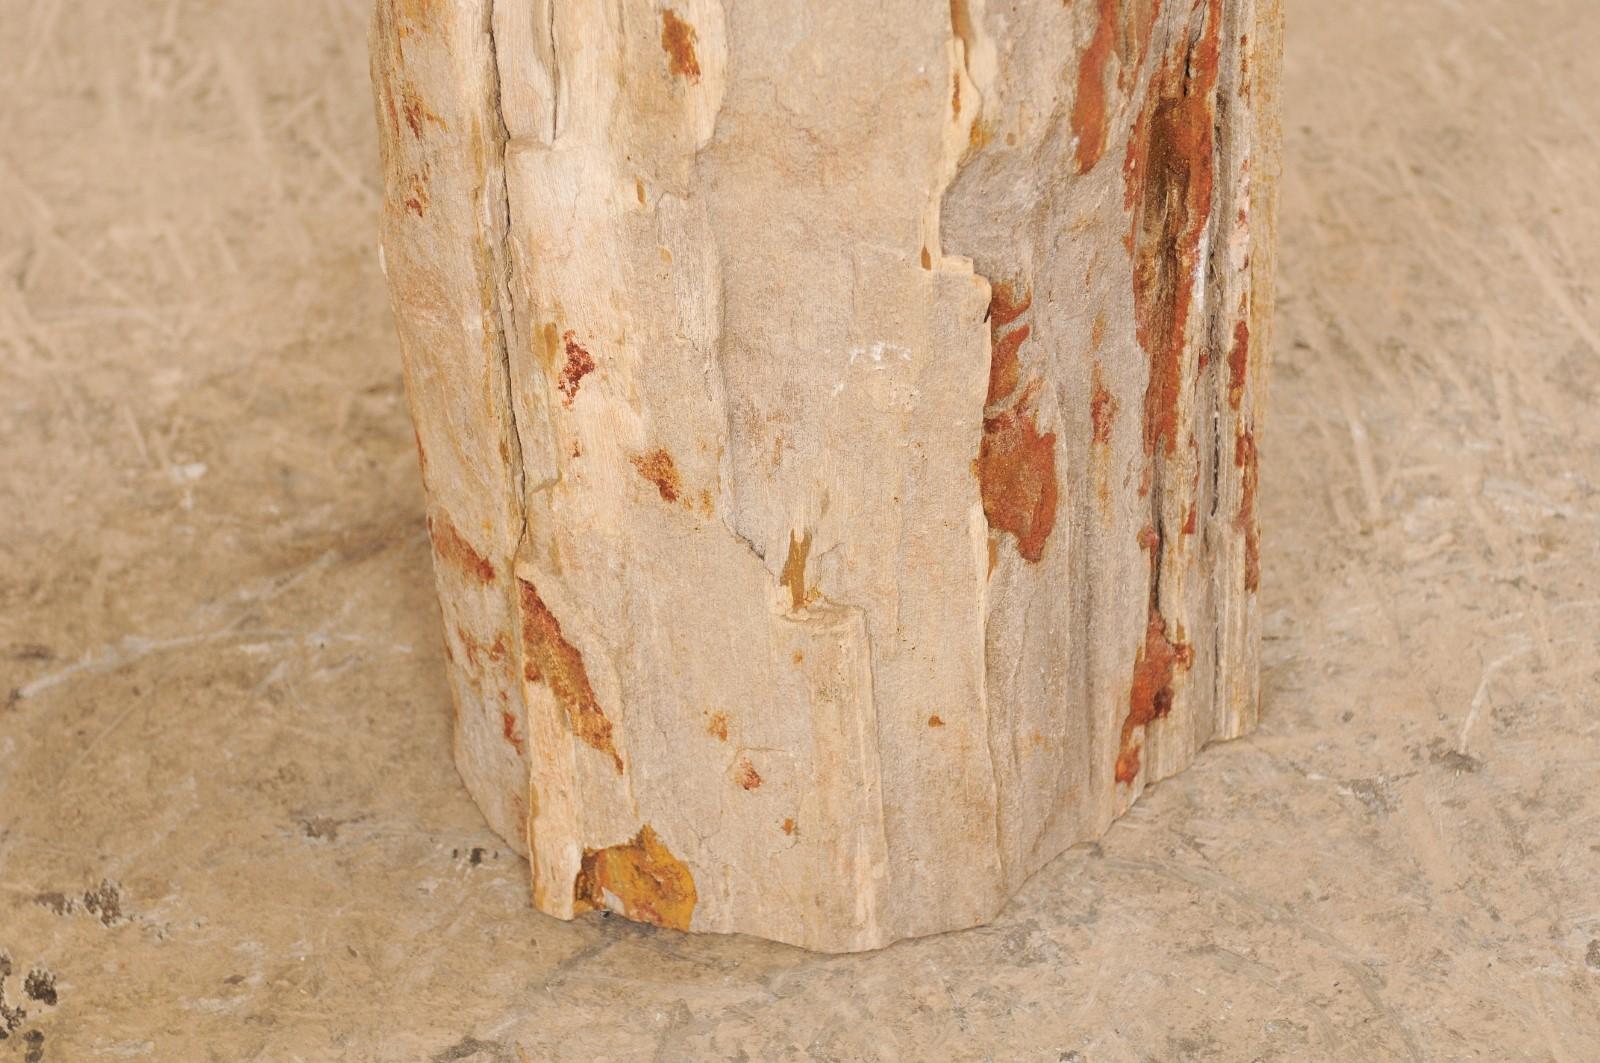 Live-Edge Petrified Wood Stool or Small Drinks Table For Sale 3